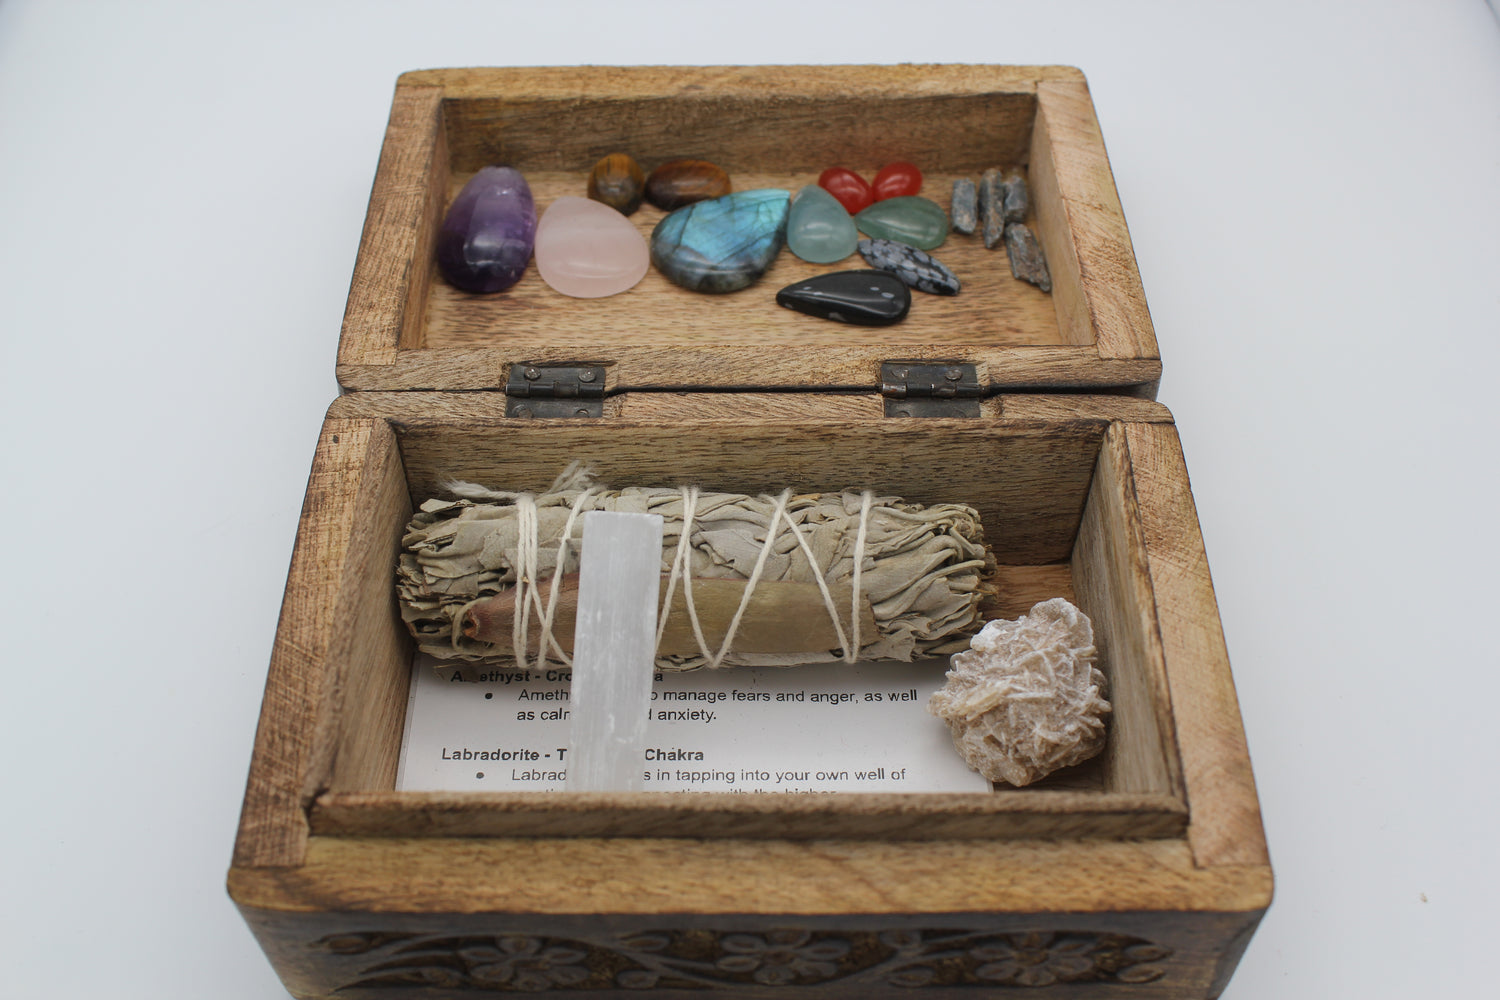 Deluxe Cleansing Kit Box Open with Stones